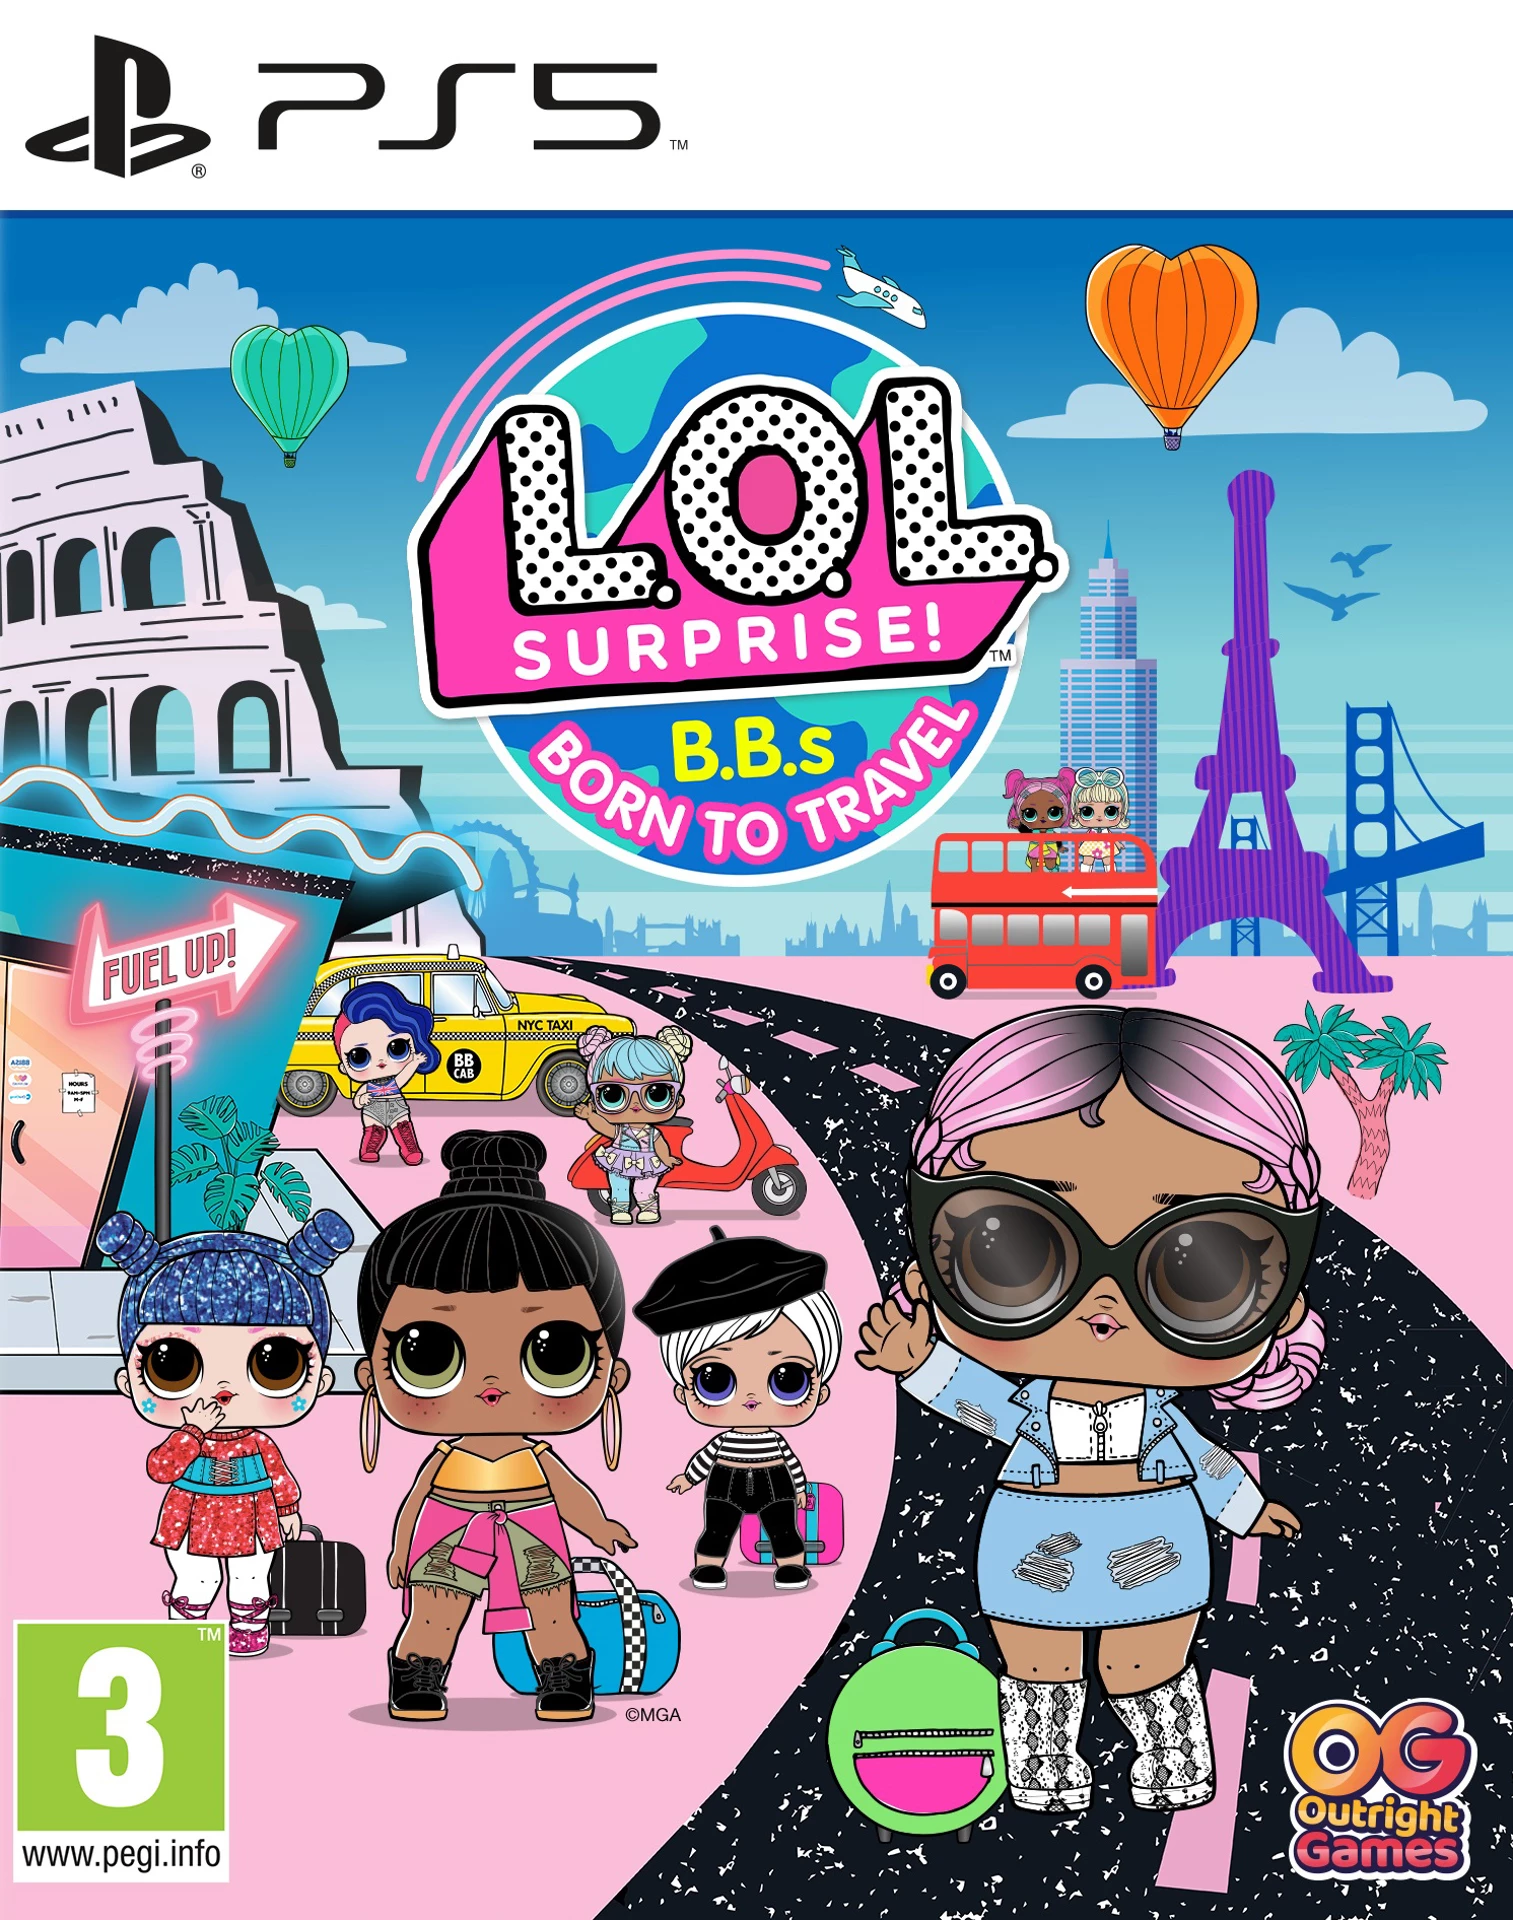 L.O.L. Surprise! B.B.s Born to Travel (PS5), Outright Games